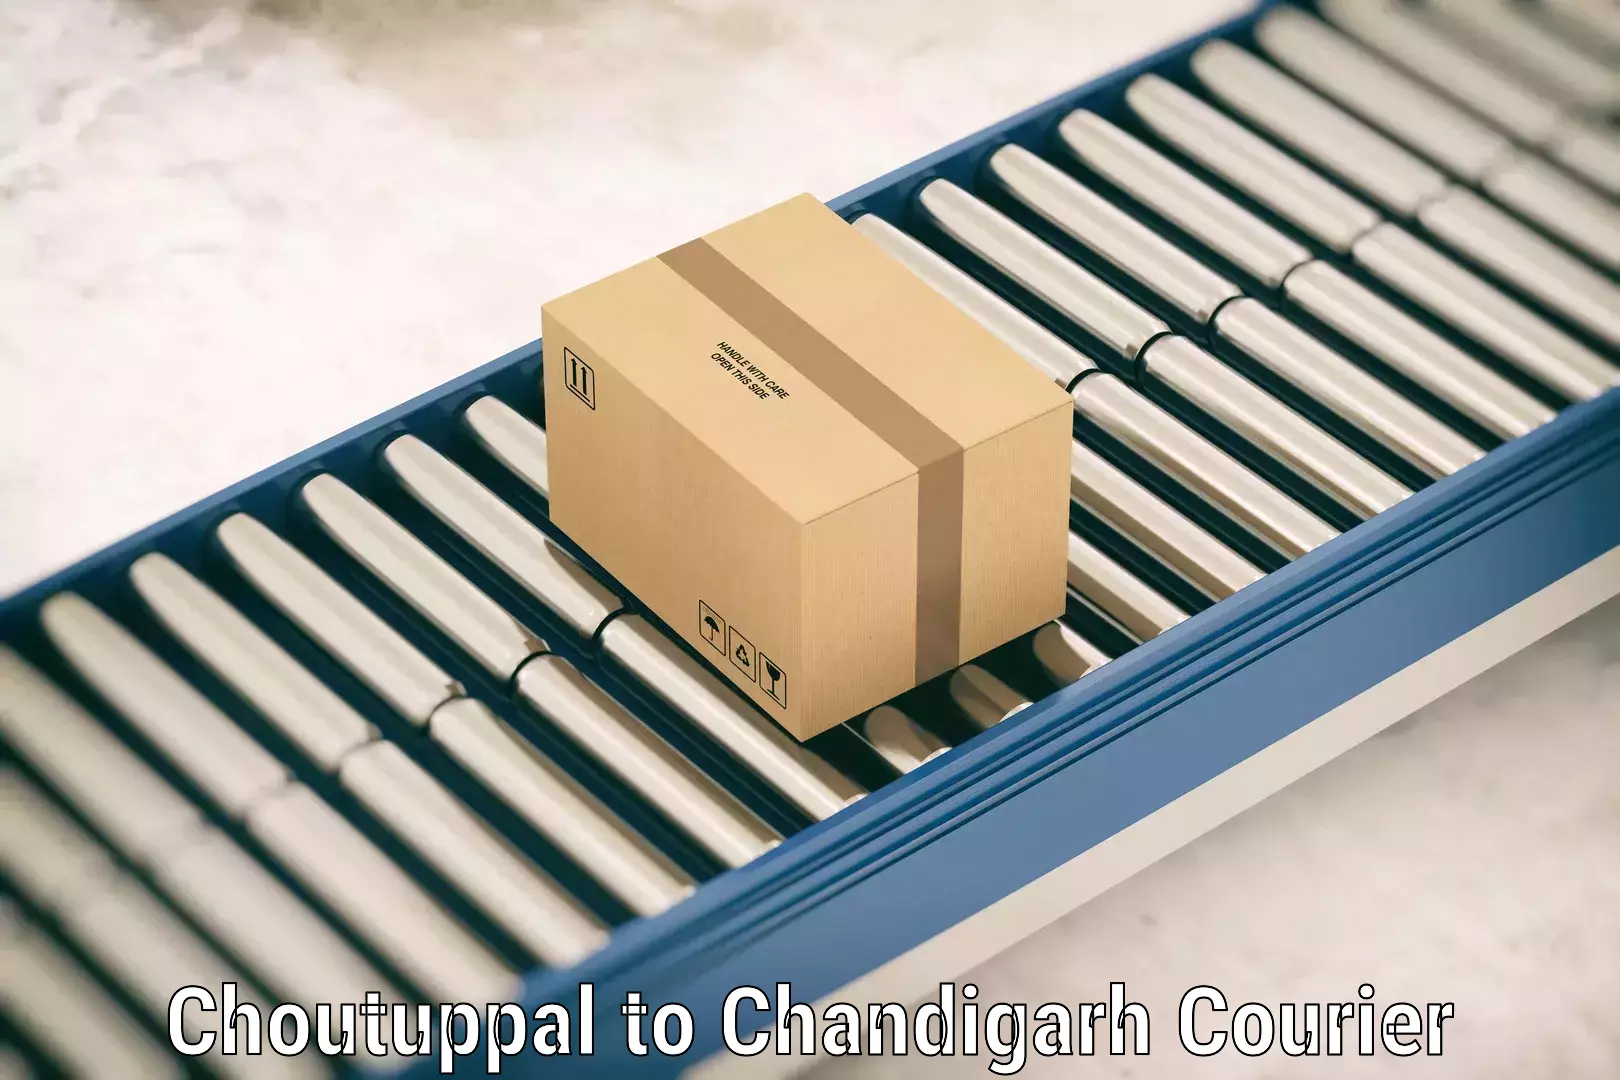 Express luggage delivery Choutuppal to Chandigarh